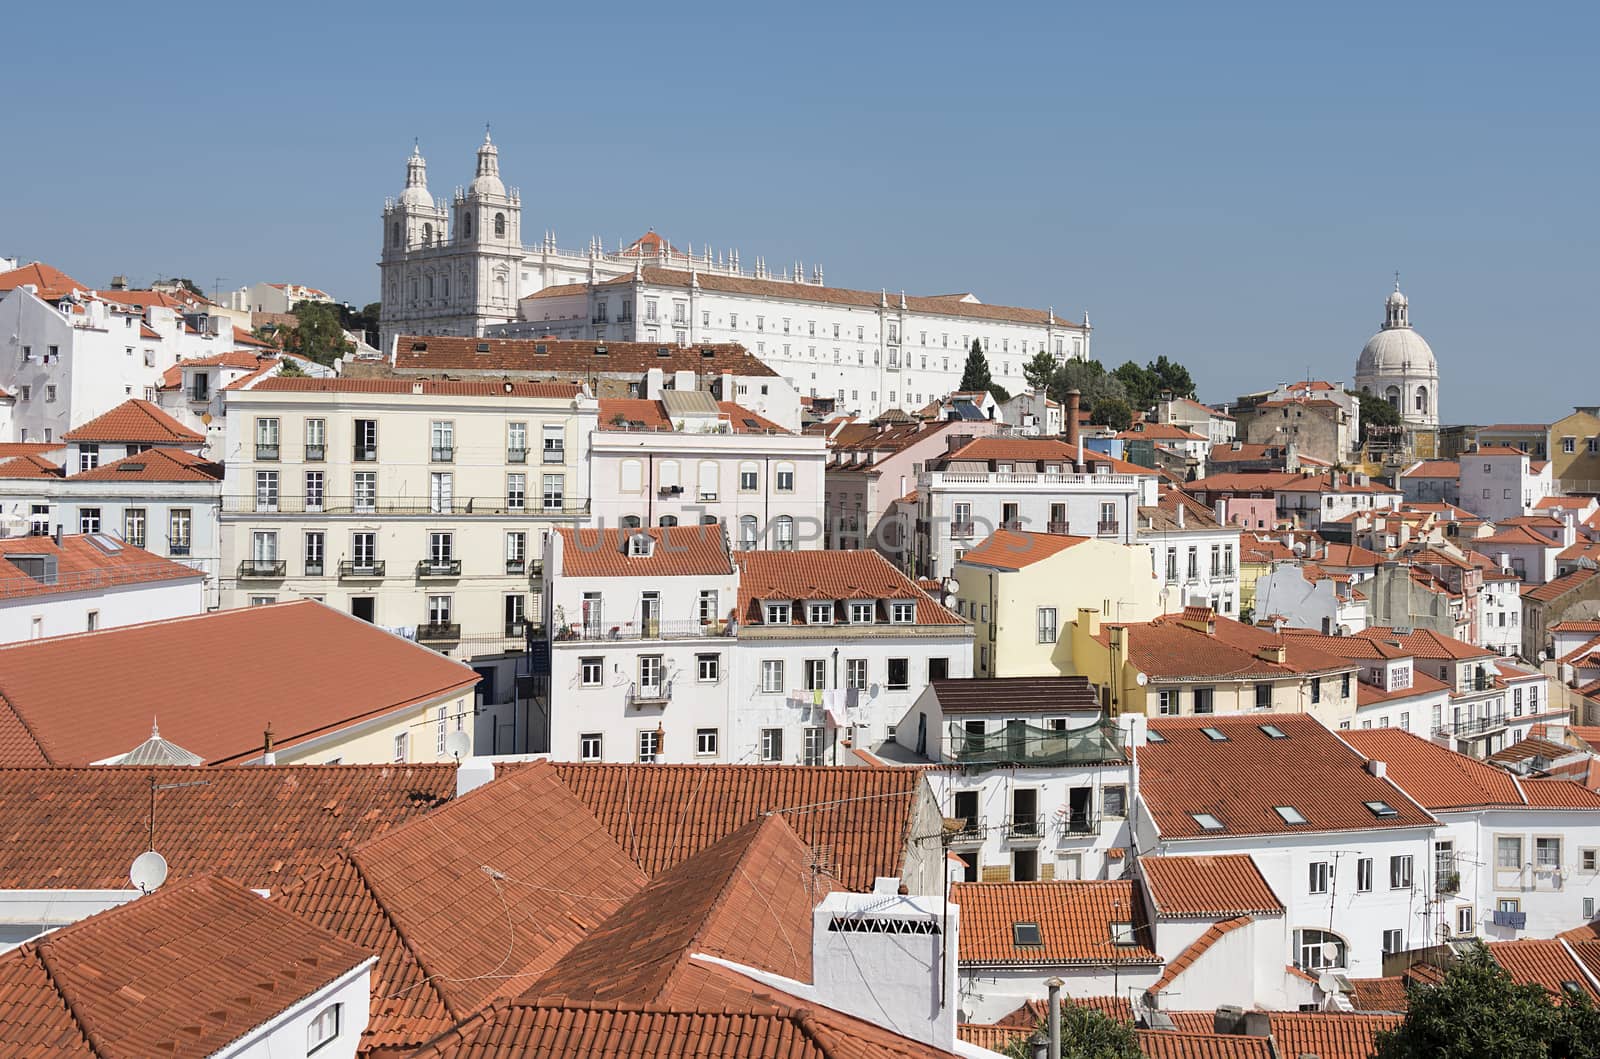 old city town panorama of Lisbon, capital city of Portugal